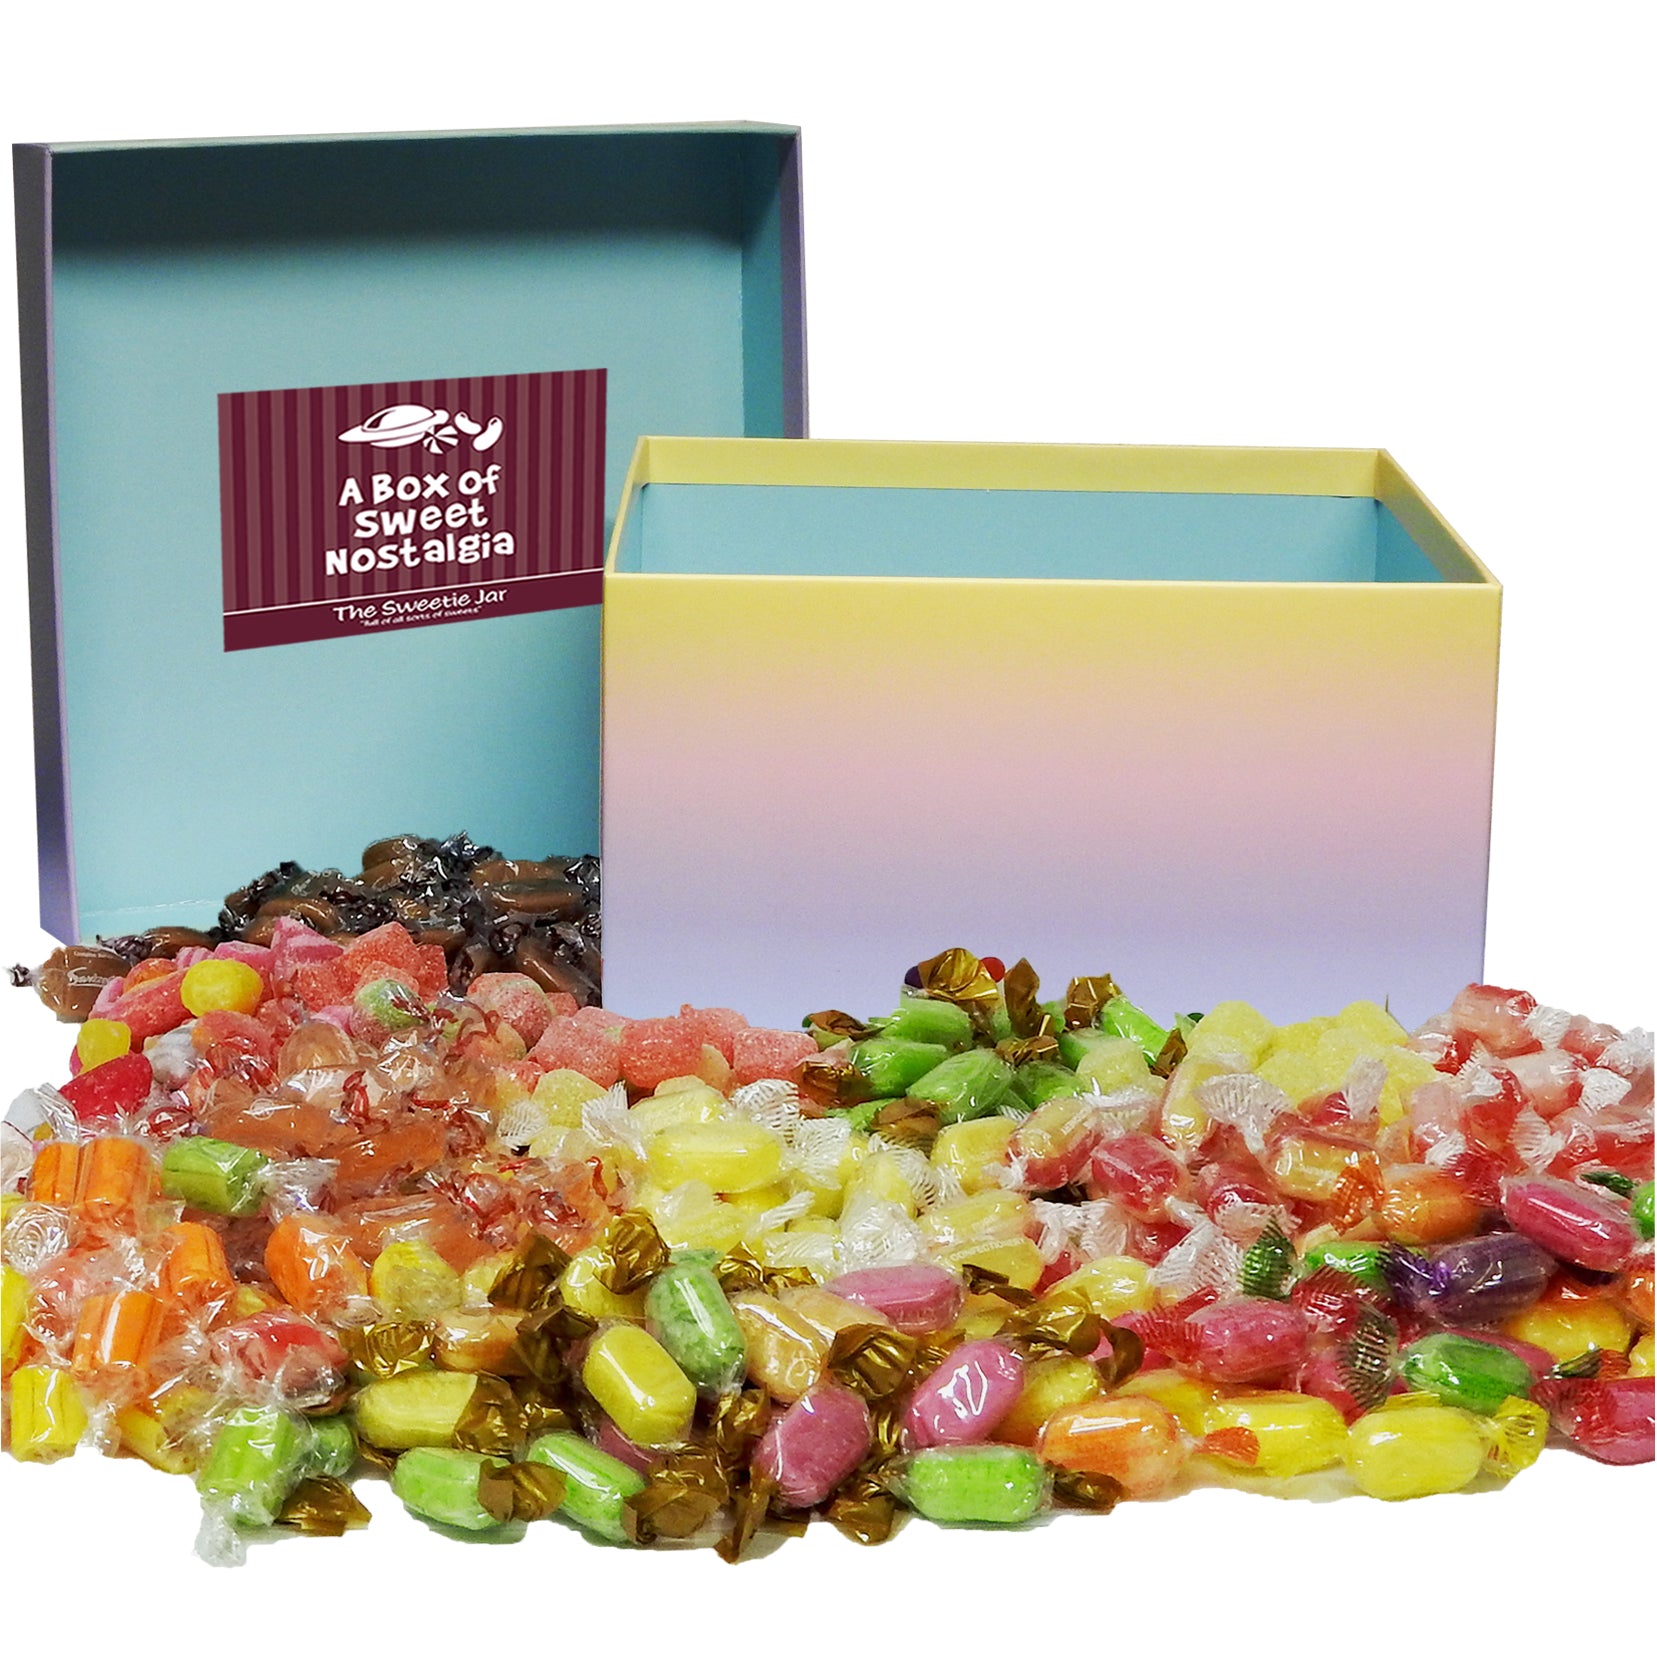 Boiled Sweets Gift Box - Retro Sweets Gifts at The Sweetie Jar